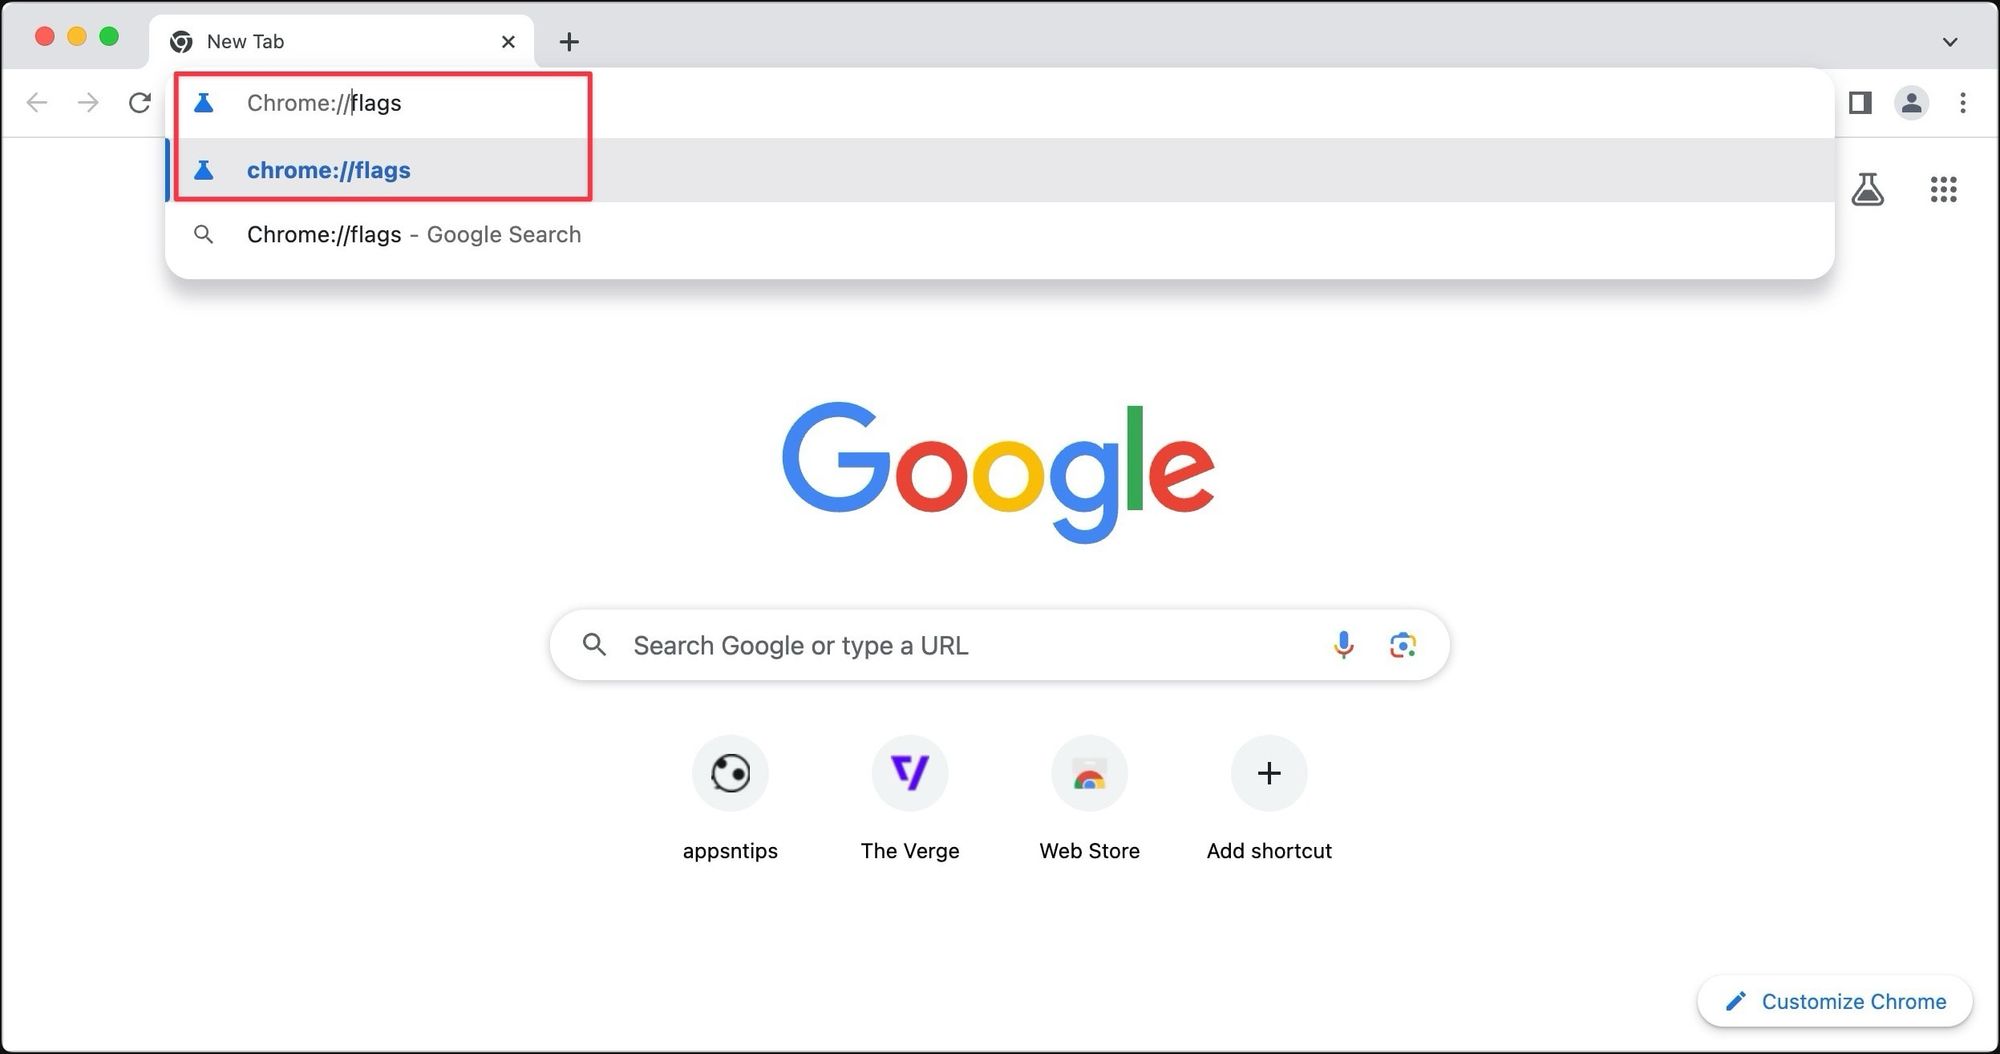 Opening Chrome Flags in Google Chrome